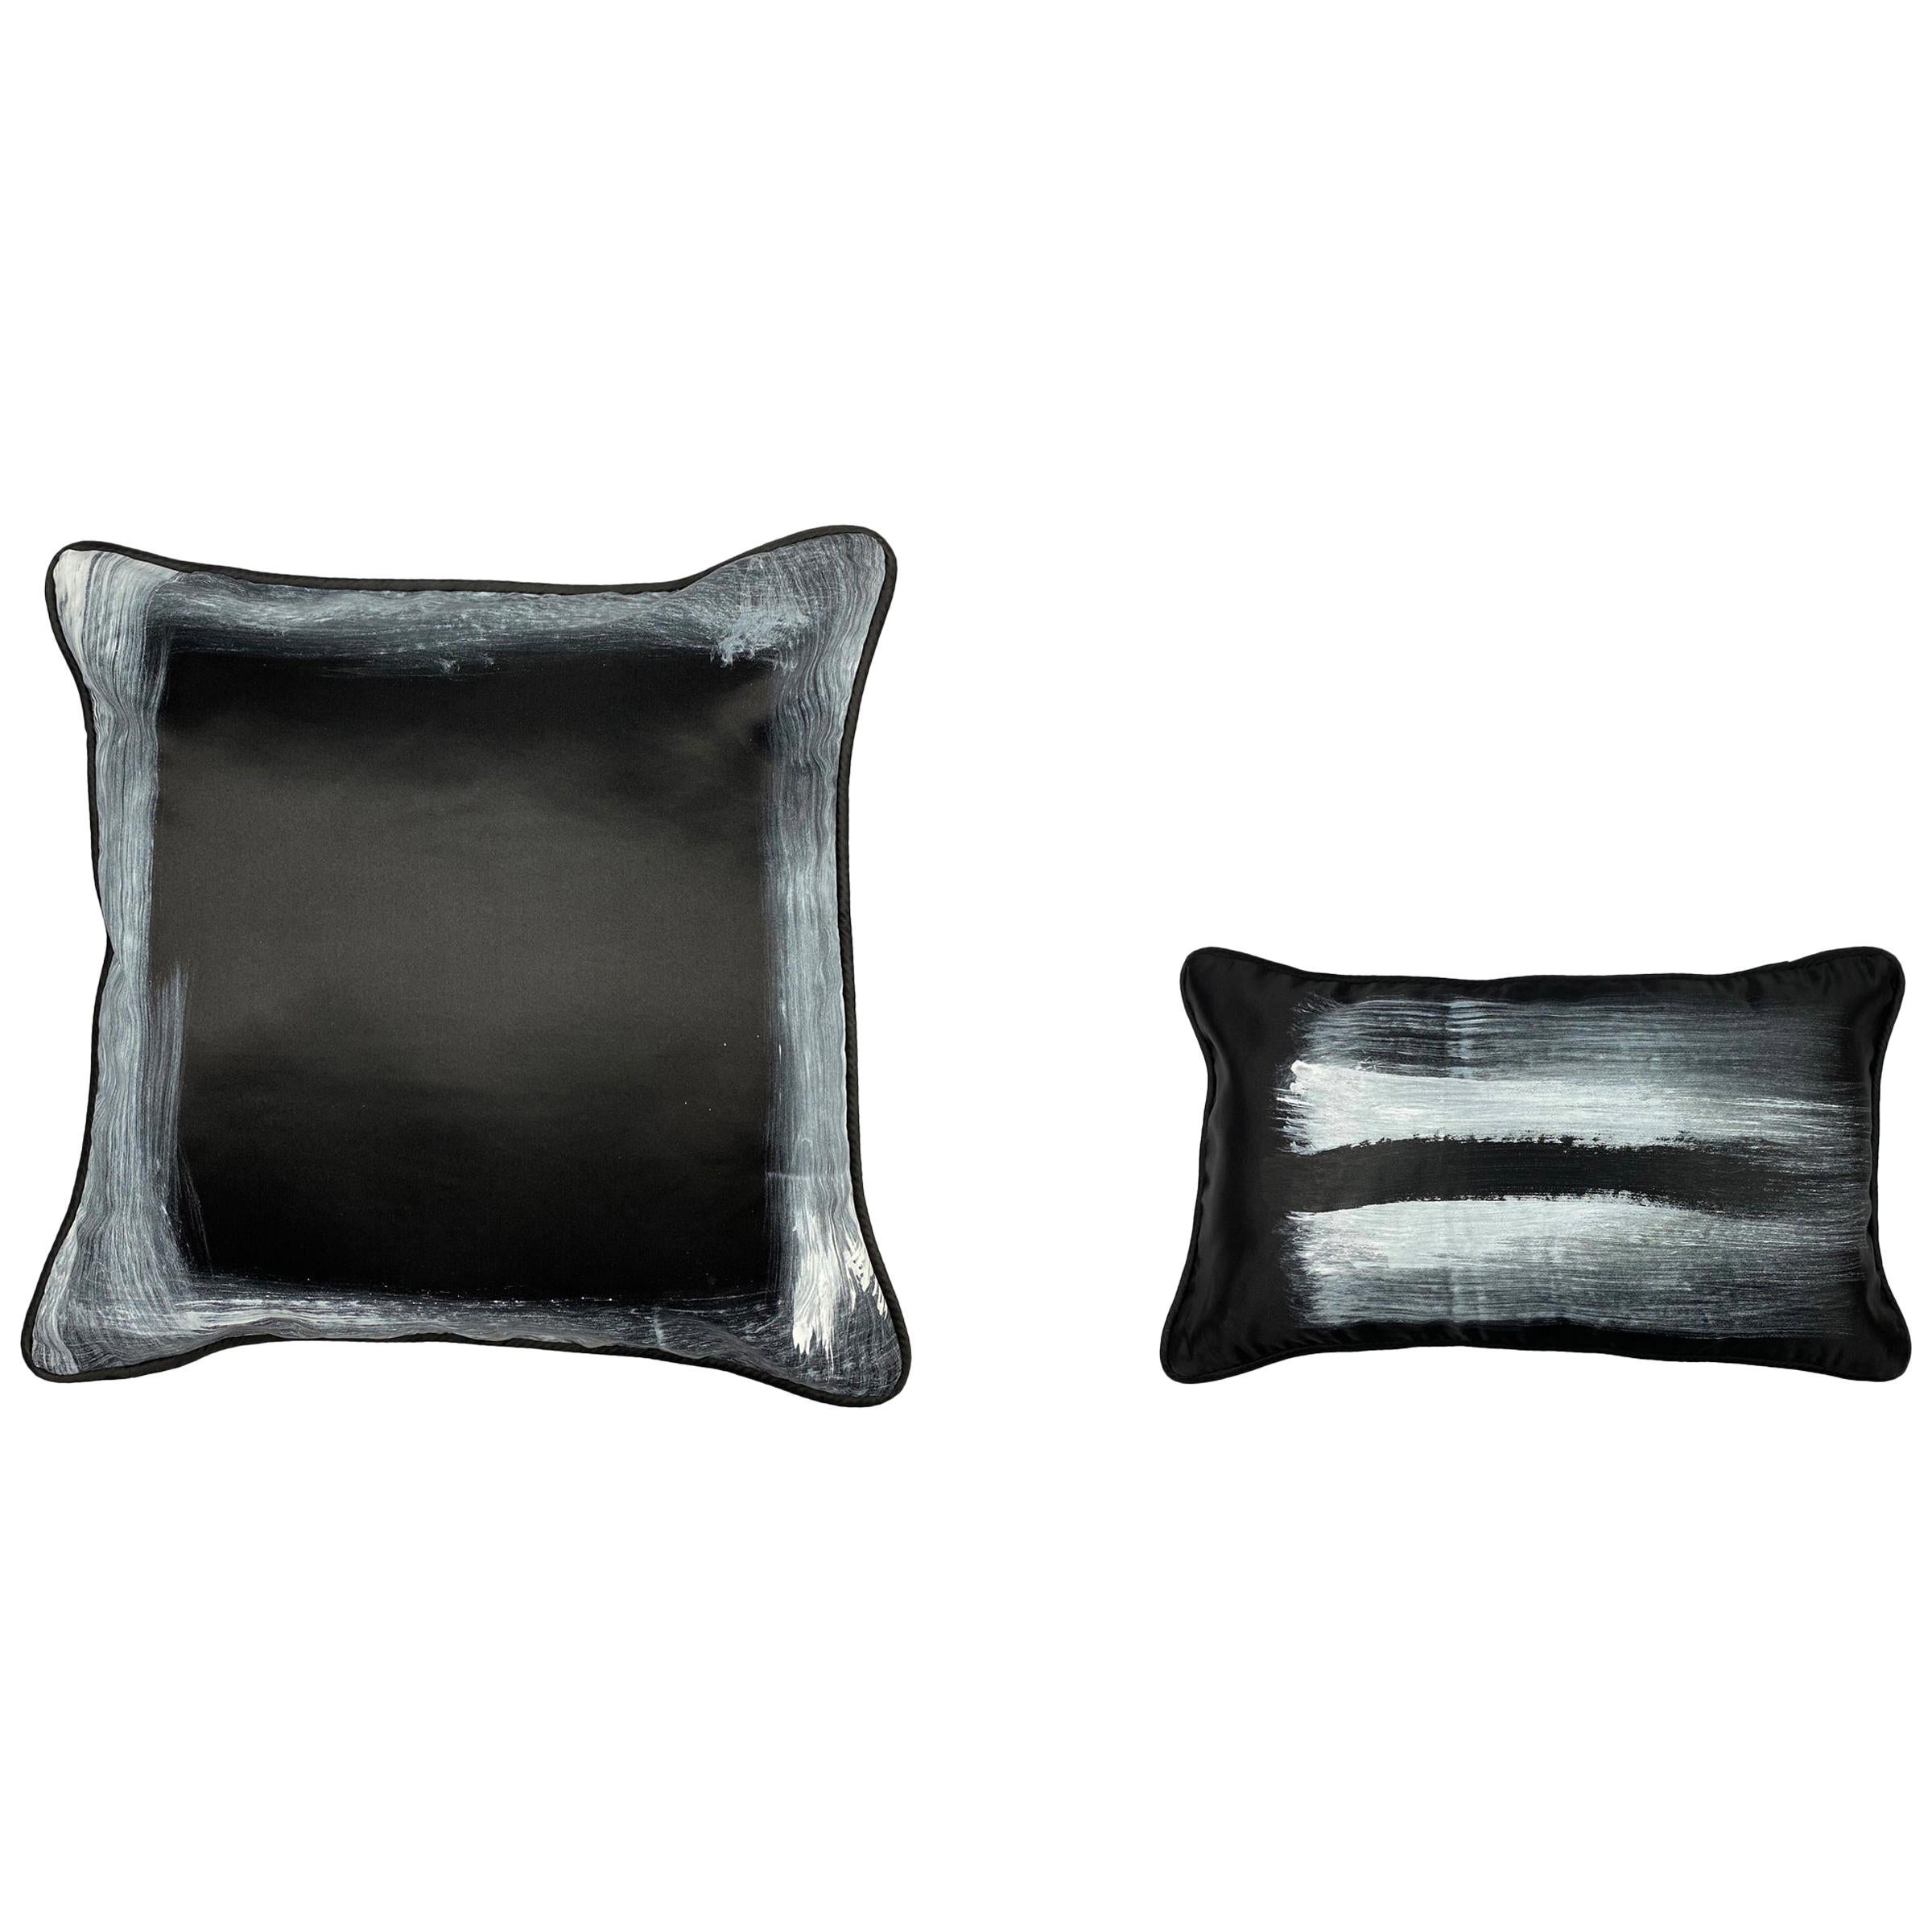 Black Contemporary Delicately Hand-Painted White-Edged Throw Pillows For Sale